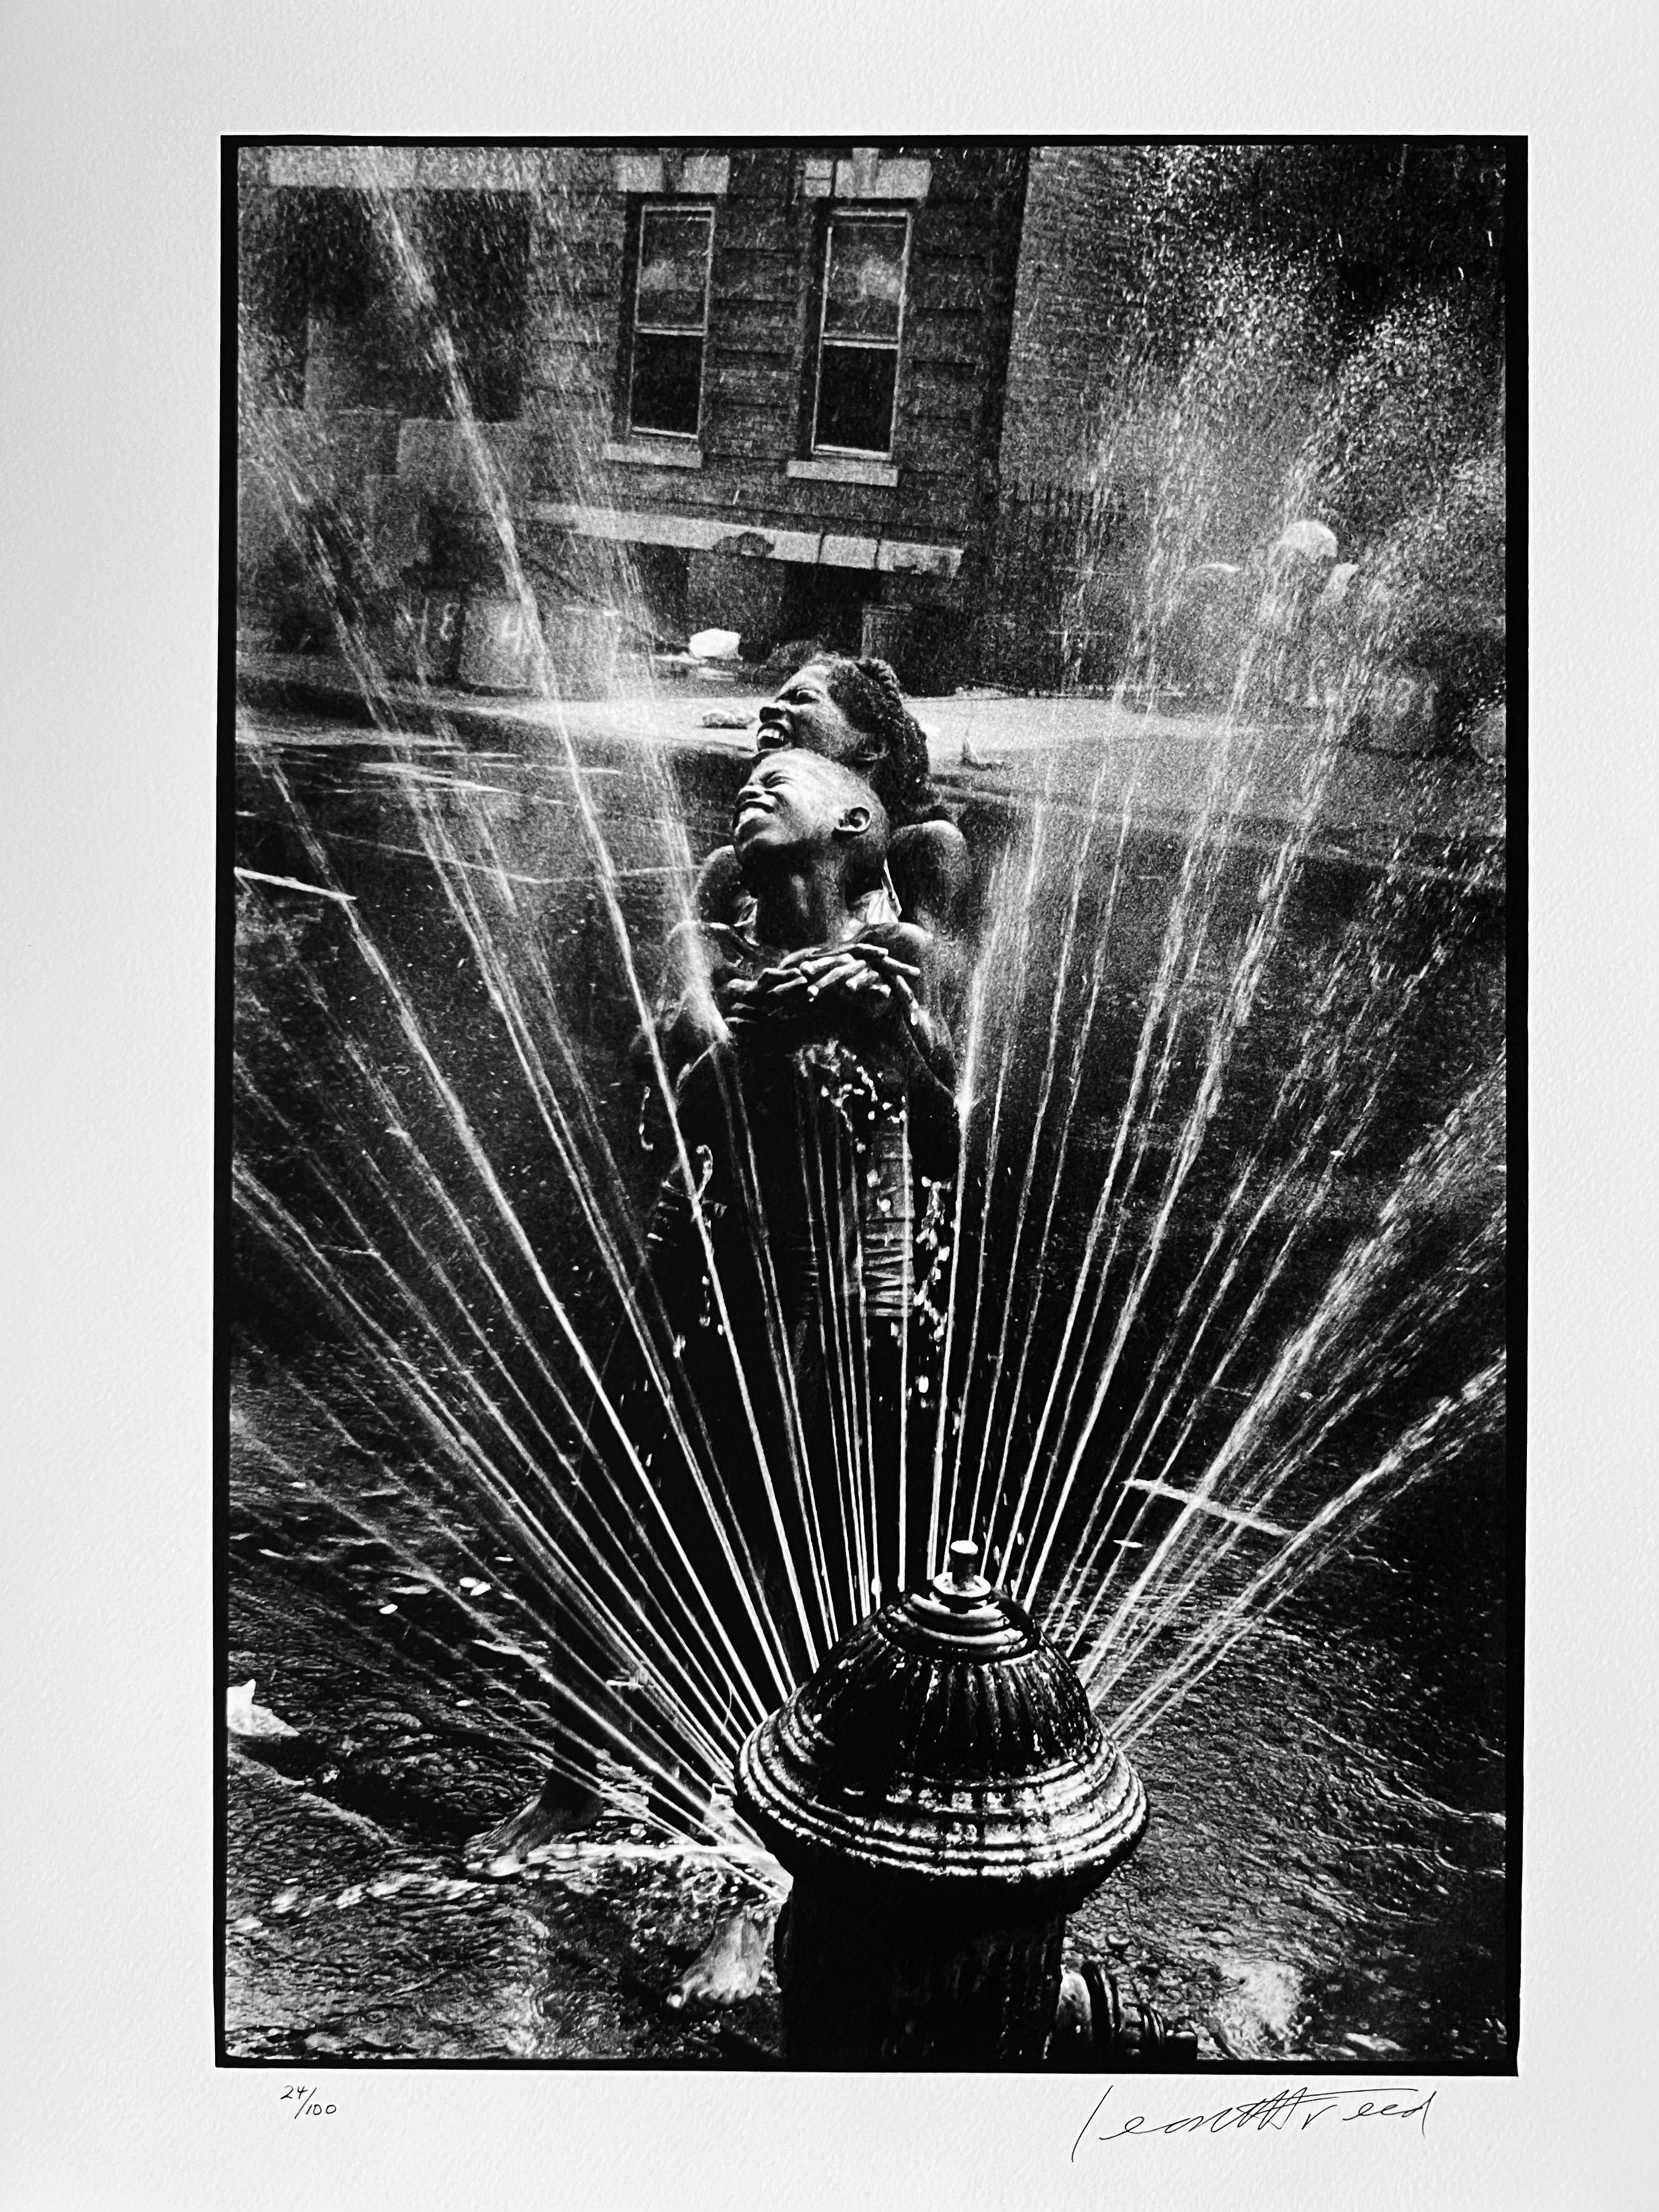 Fire Hydrant, Harlem, Portrait Photography of African American Children 1960s